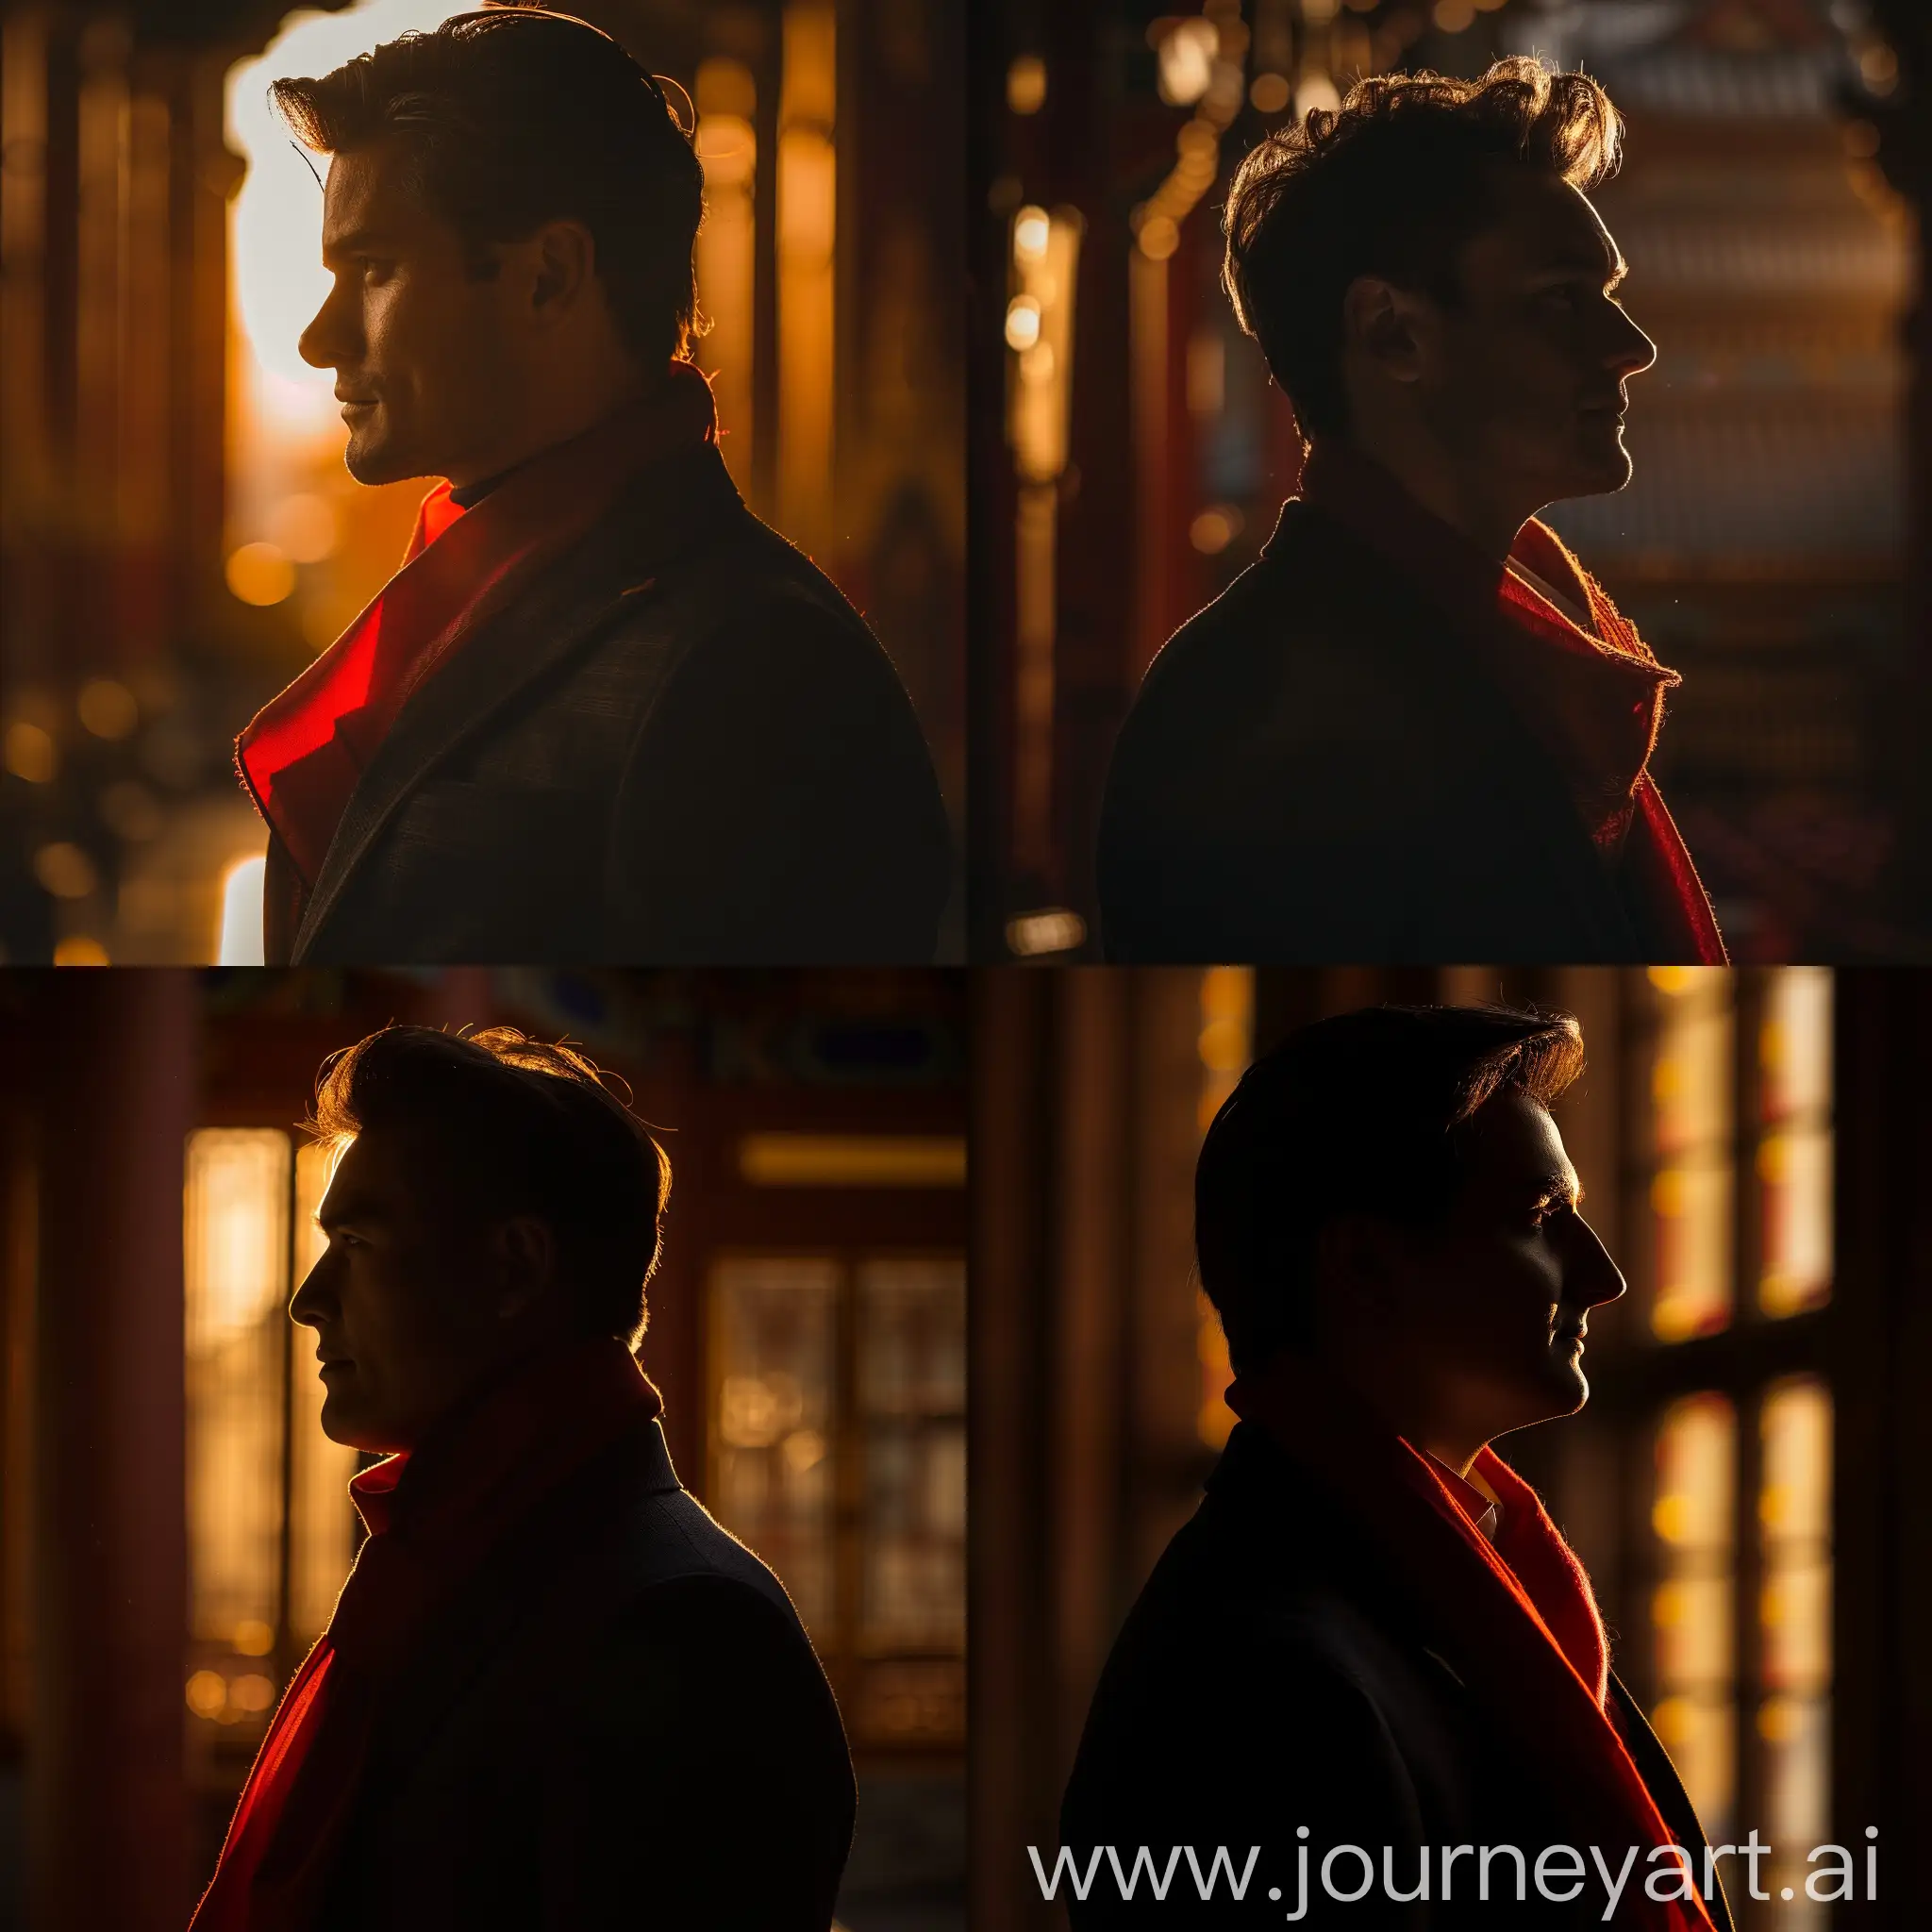 Silhouette-of-a-Suited-Man-in-Temple-with-Red-Scarf-High-Definition-Photography